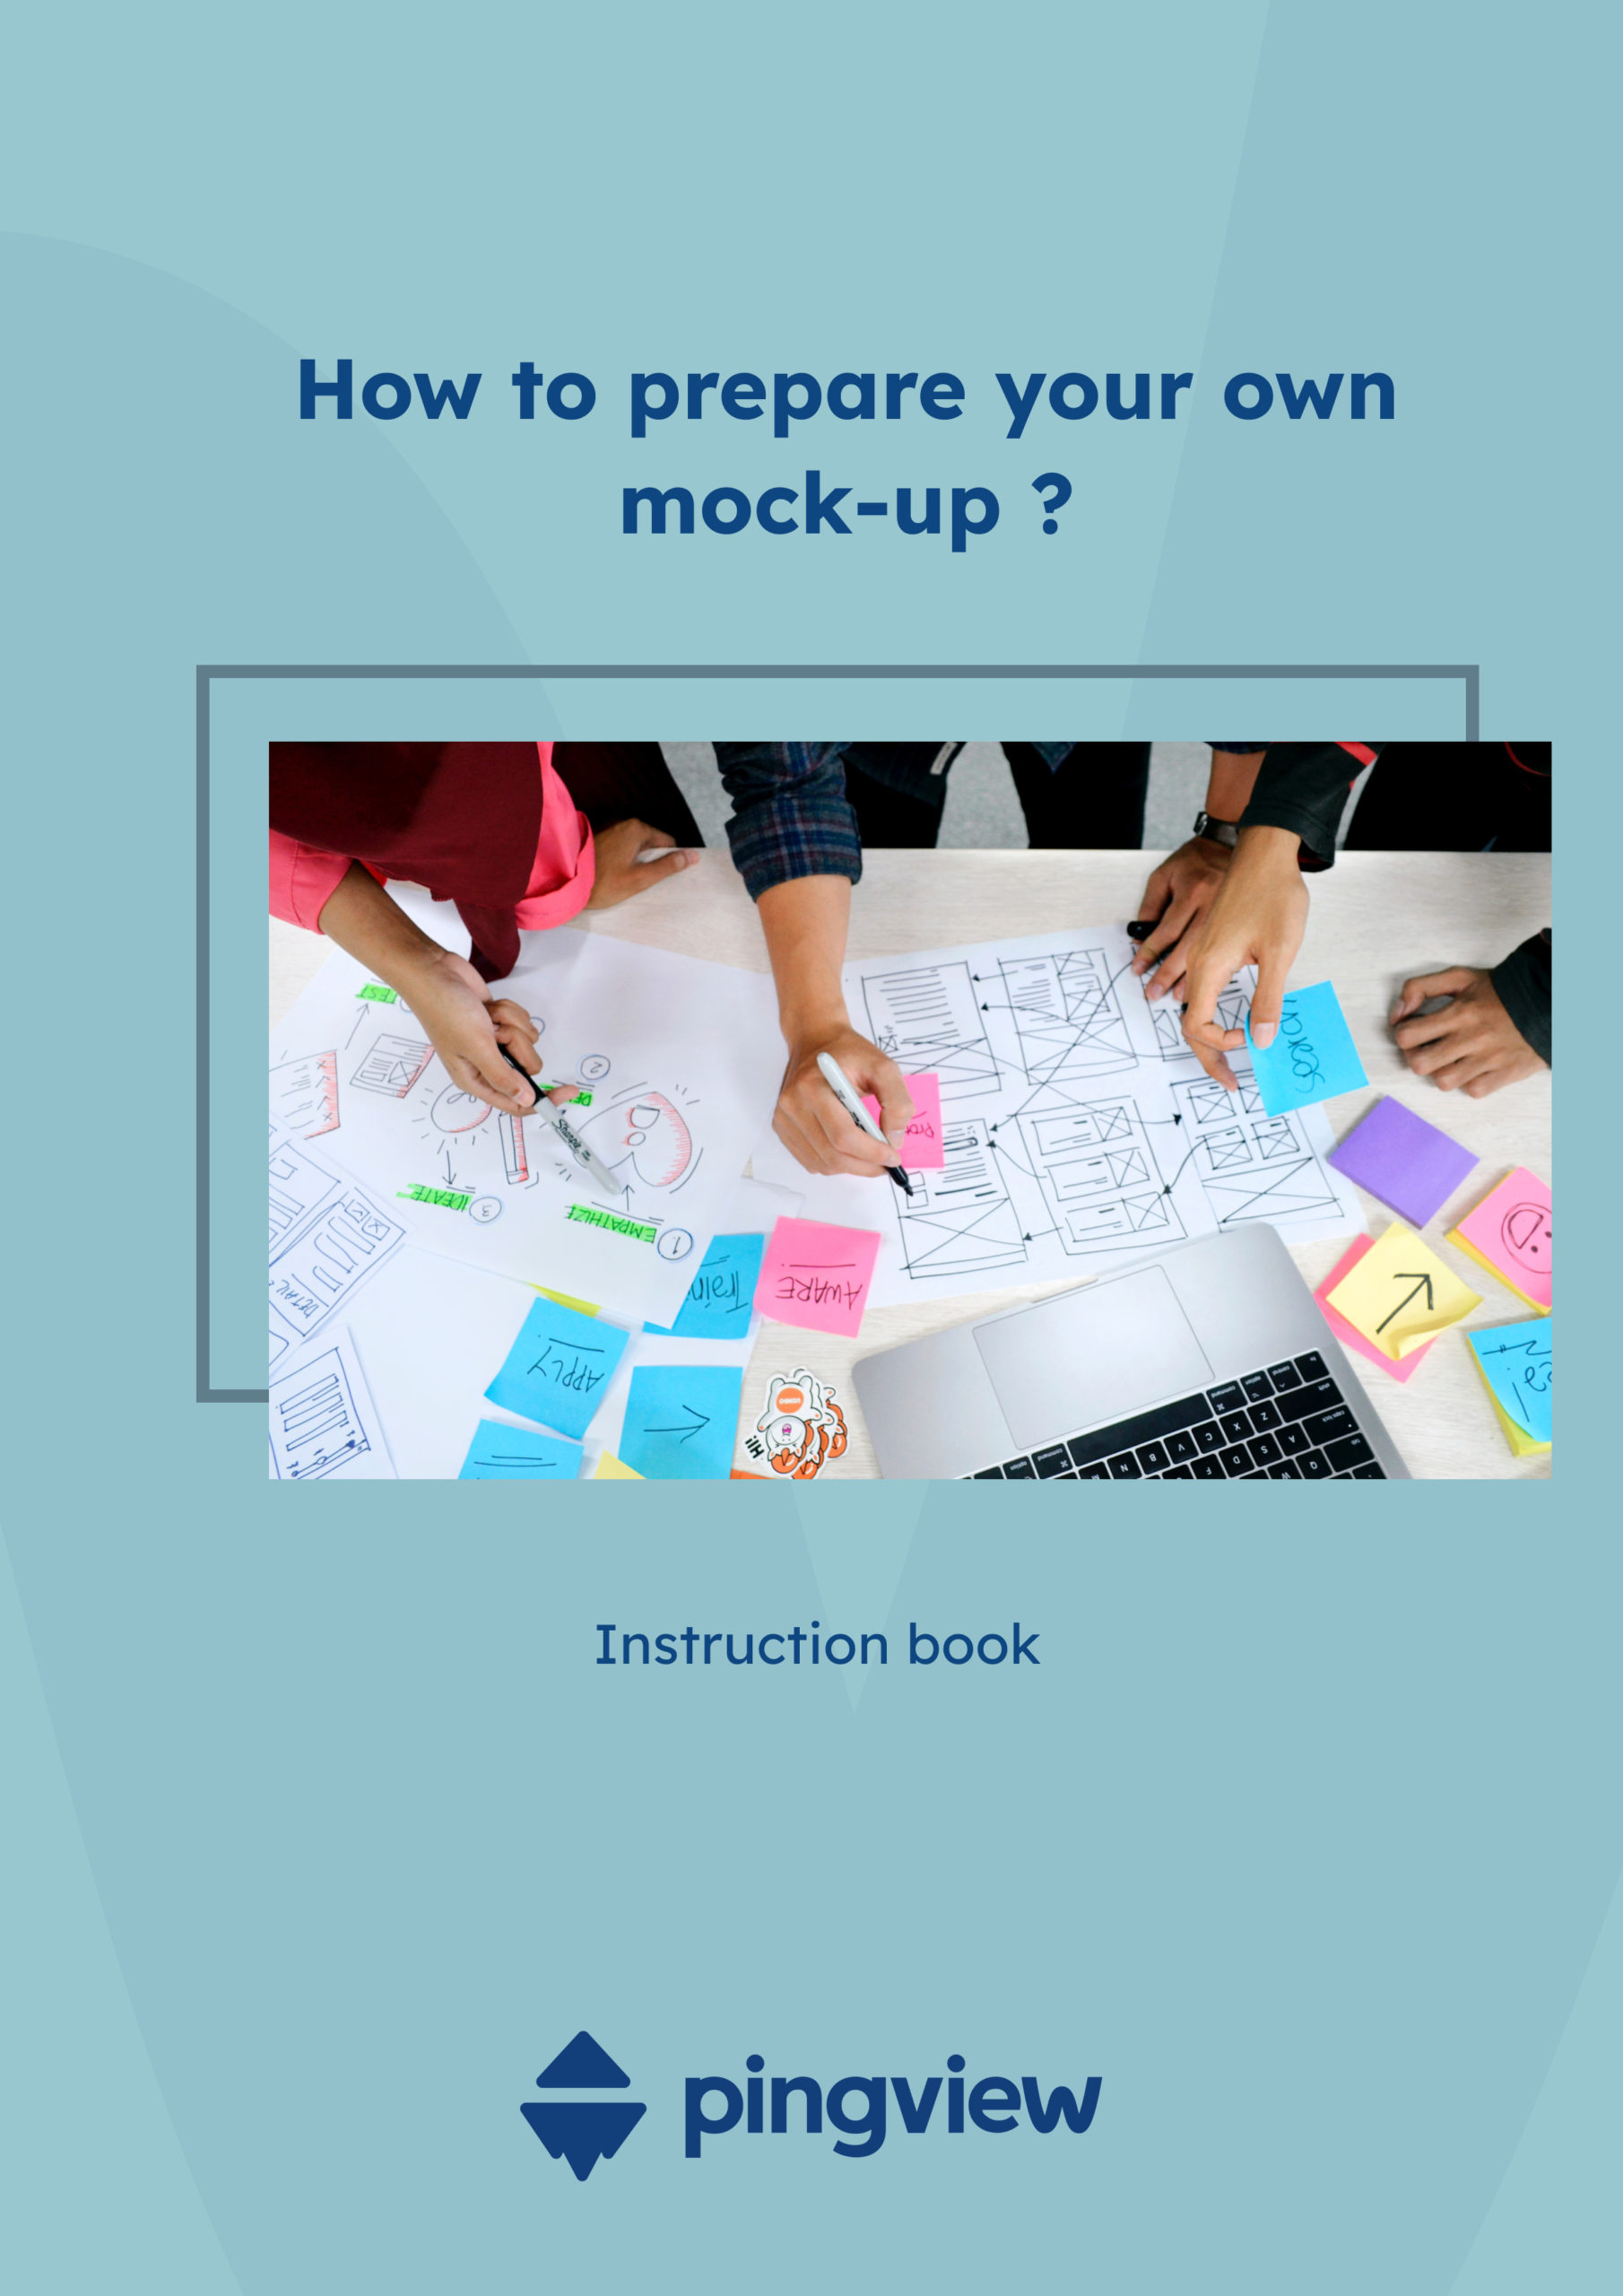 How to prepare your own mock-up